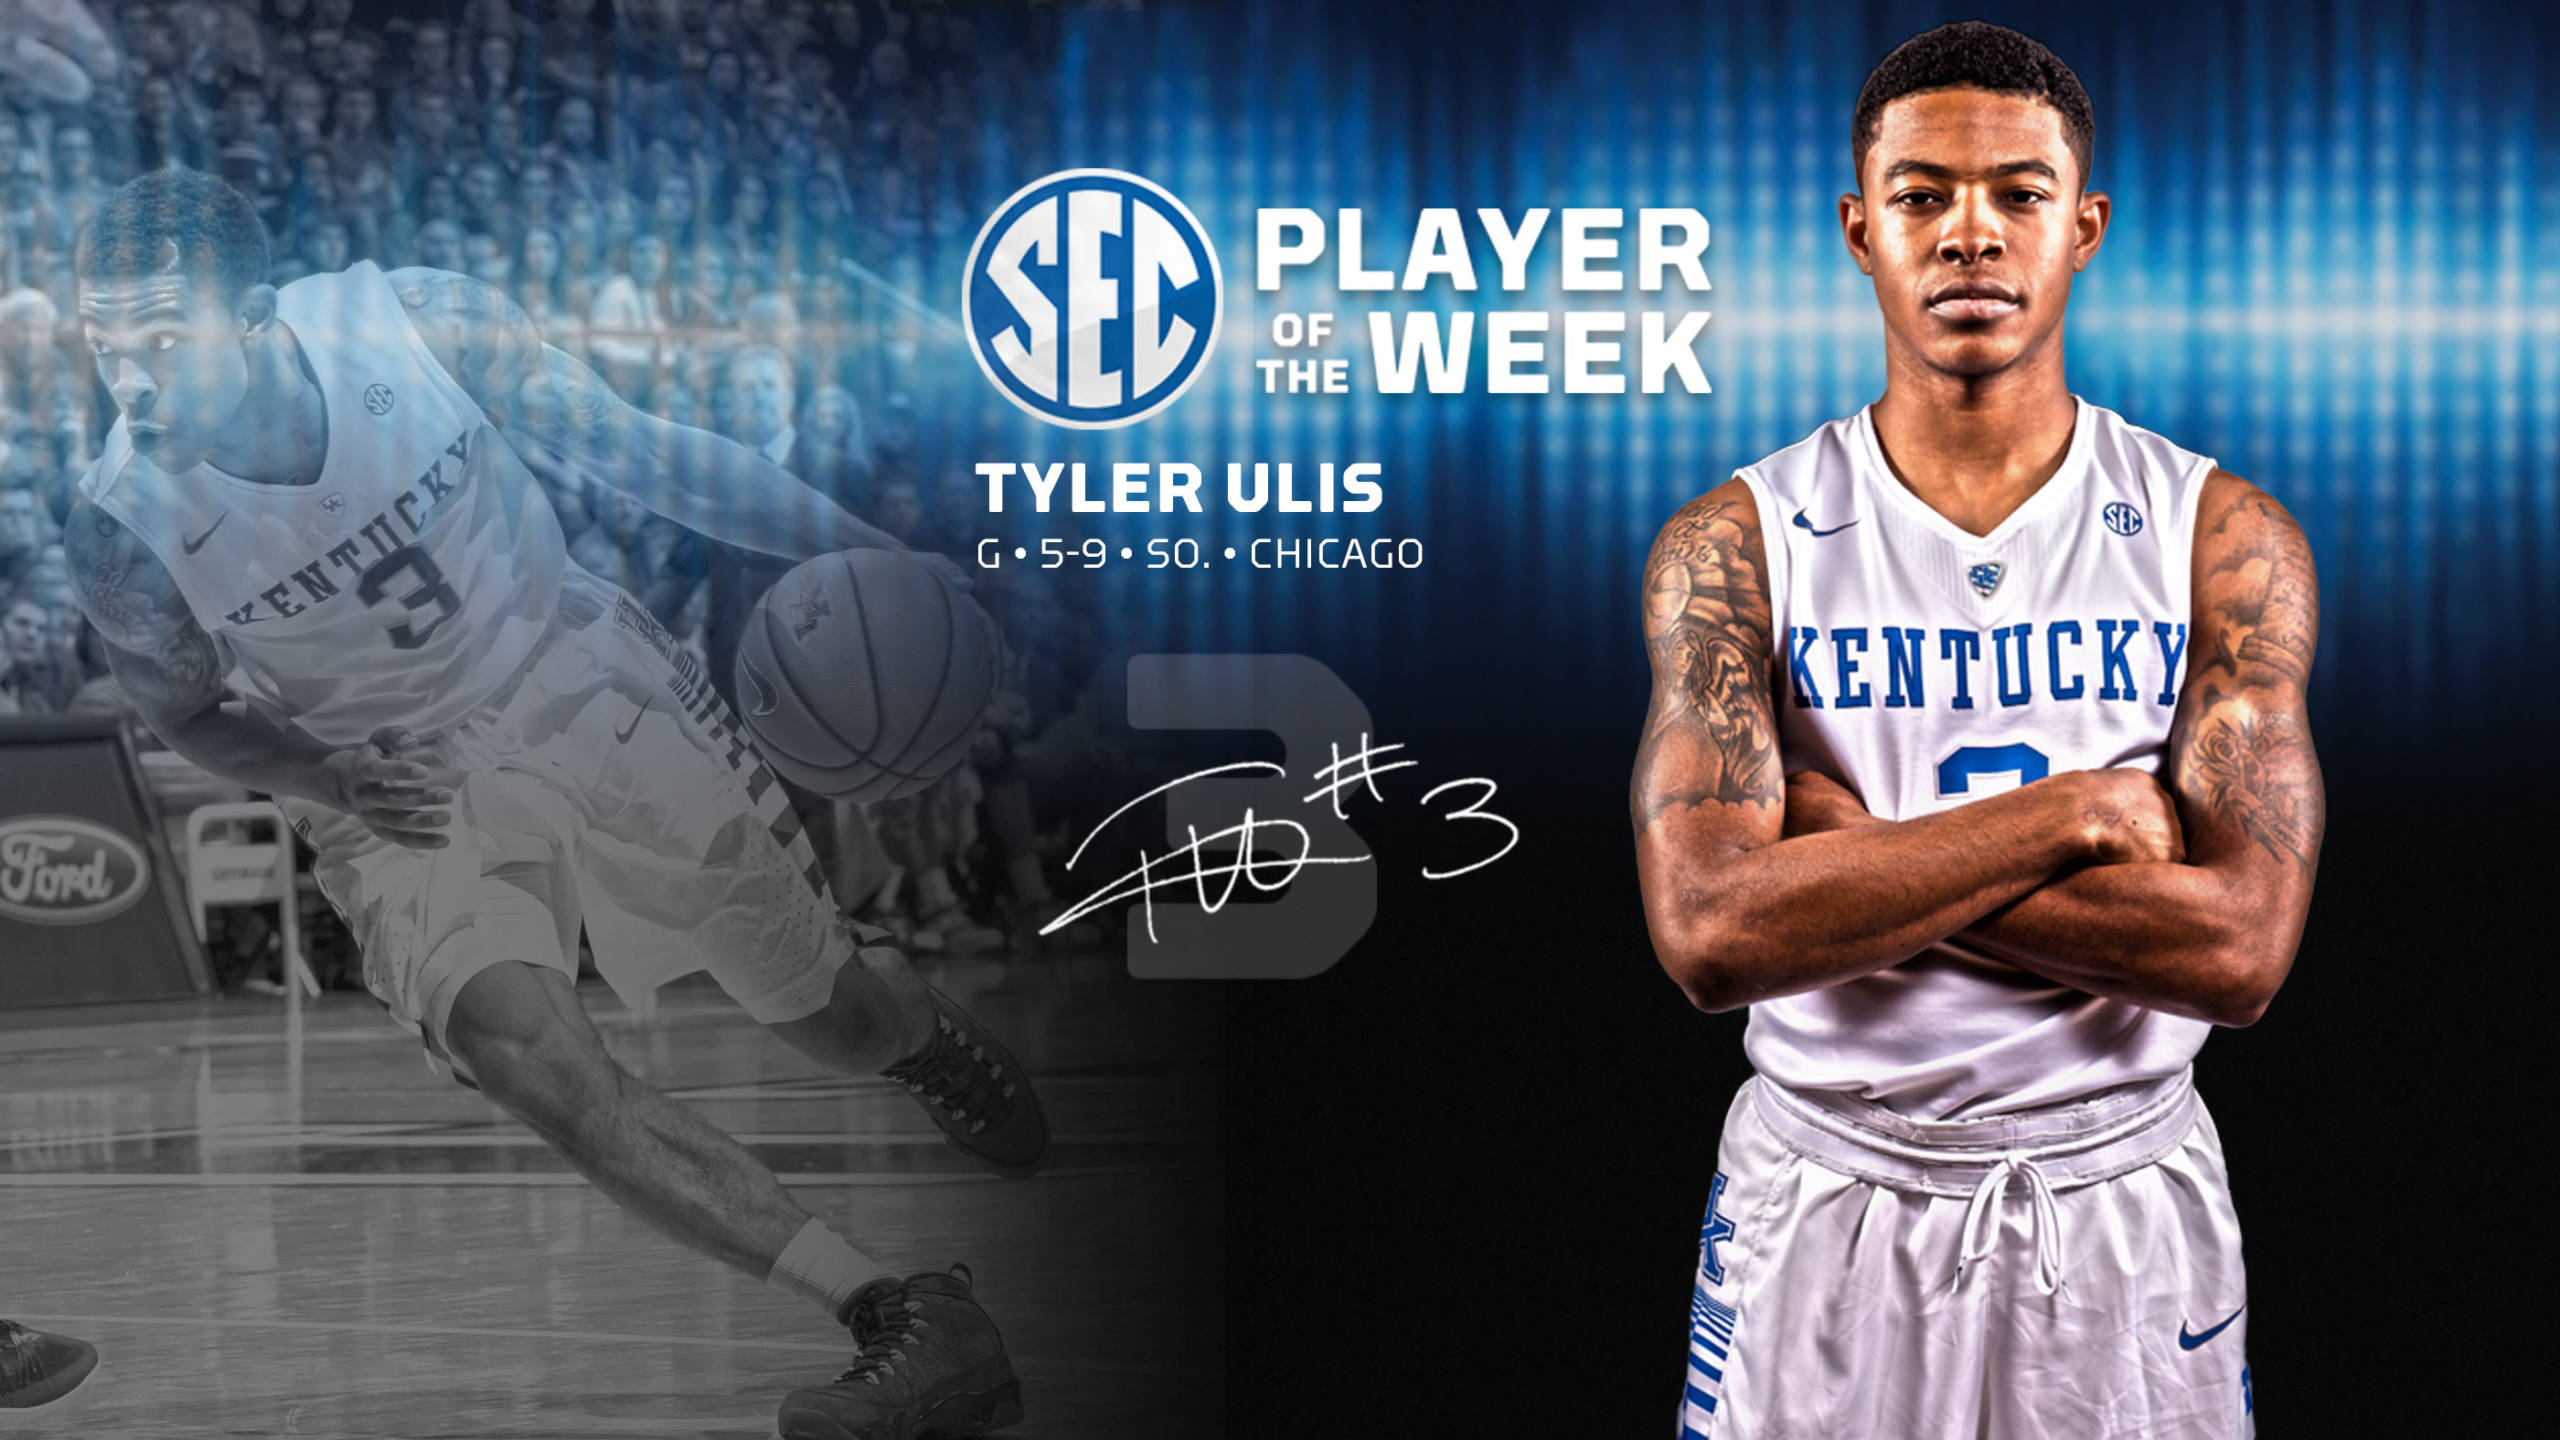 Ulis Wins SEC Player of the Week Award after Win over Louisville